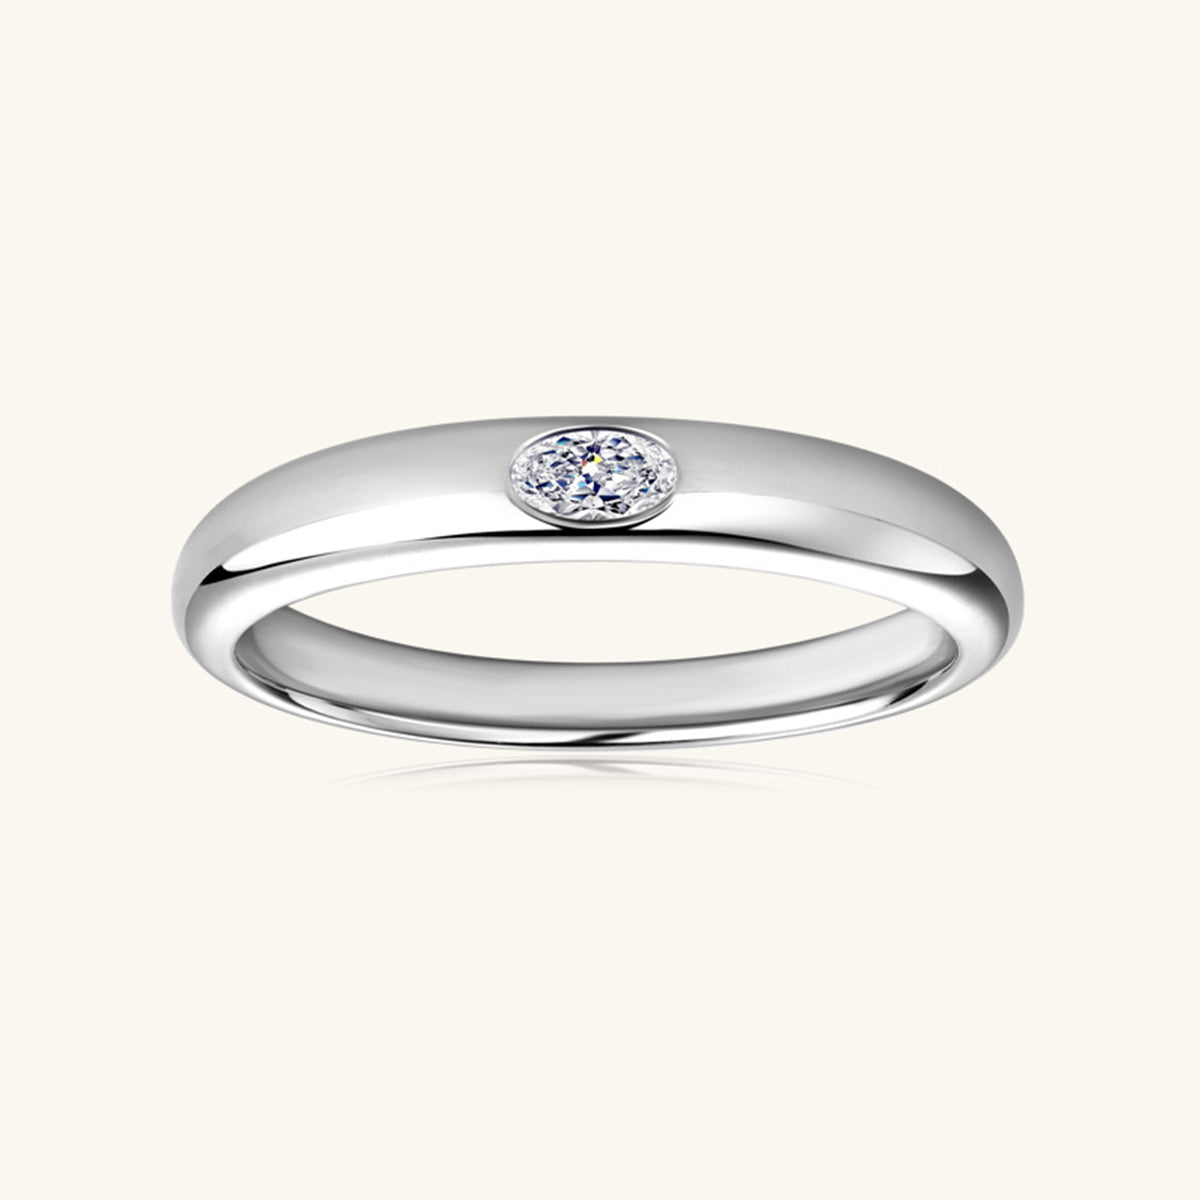 925 Sterling Silver Inlaid Moissanite Ring